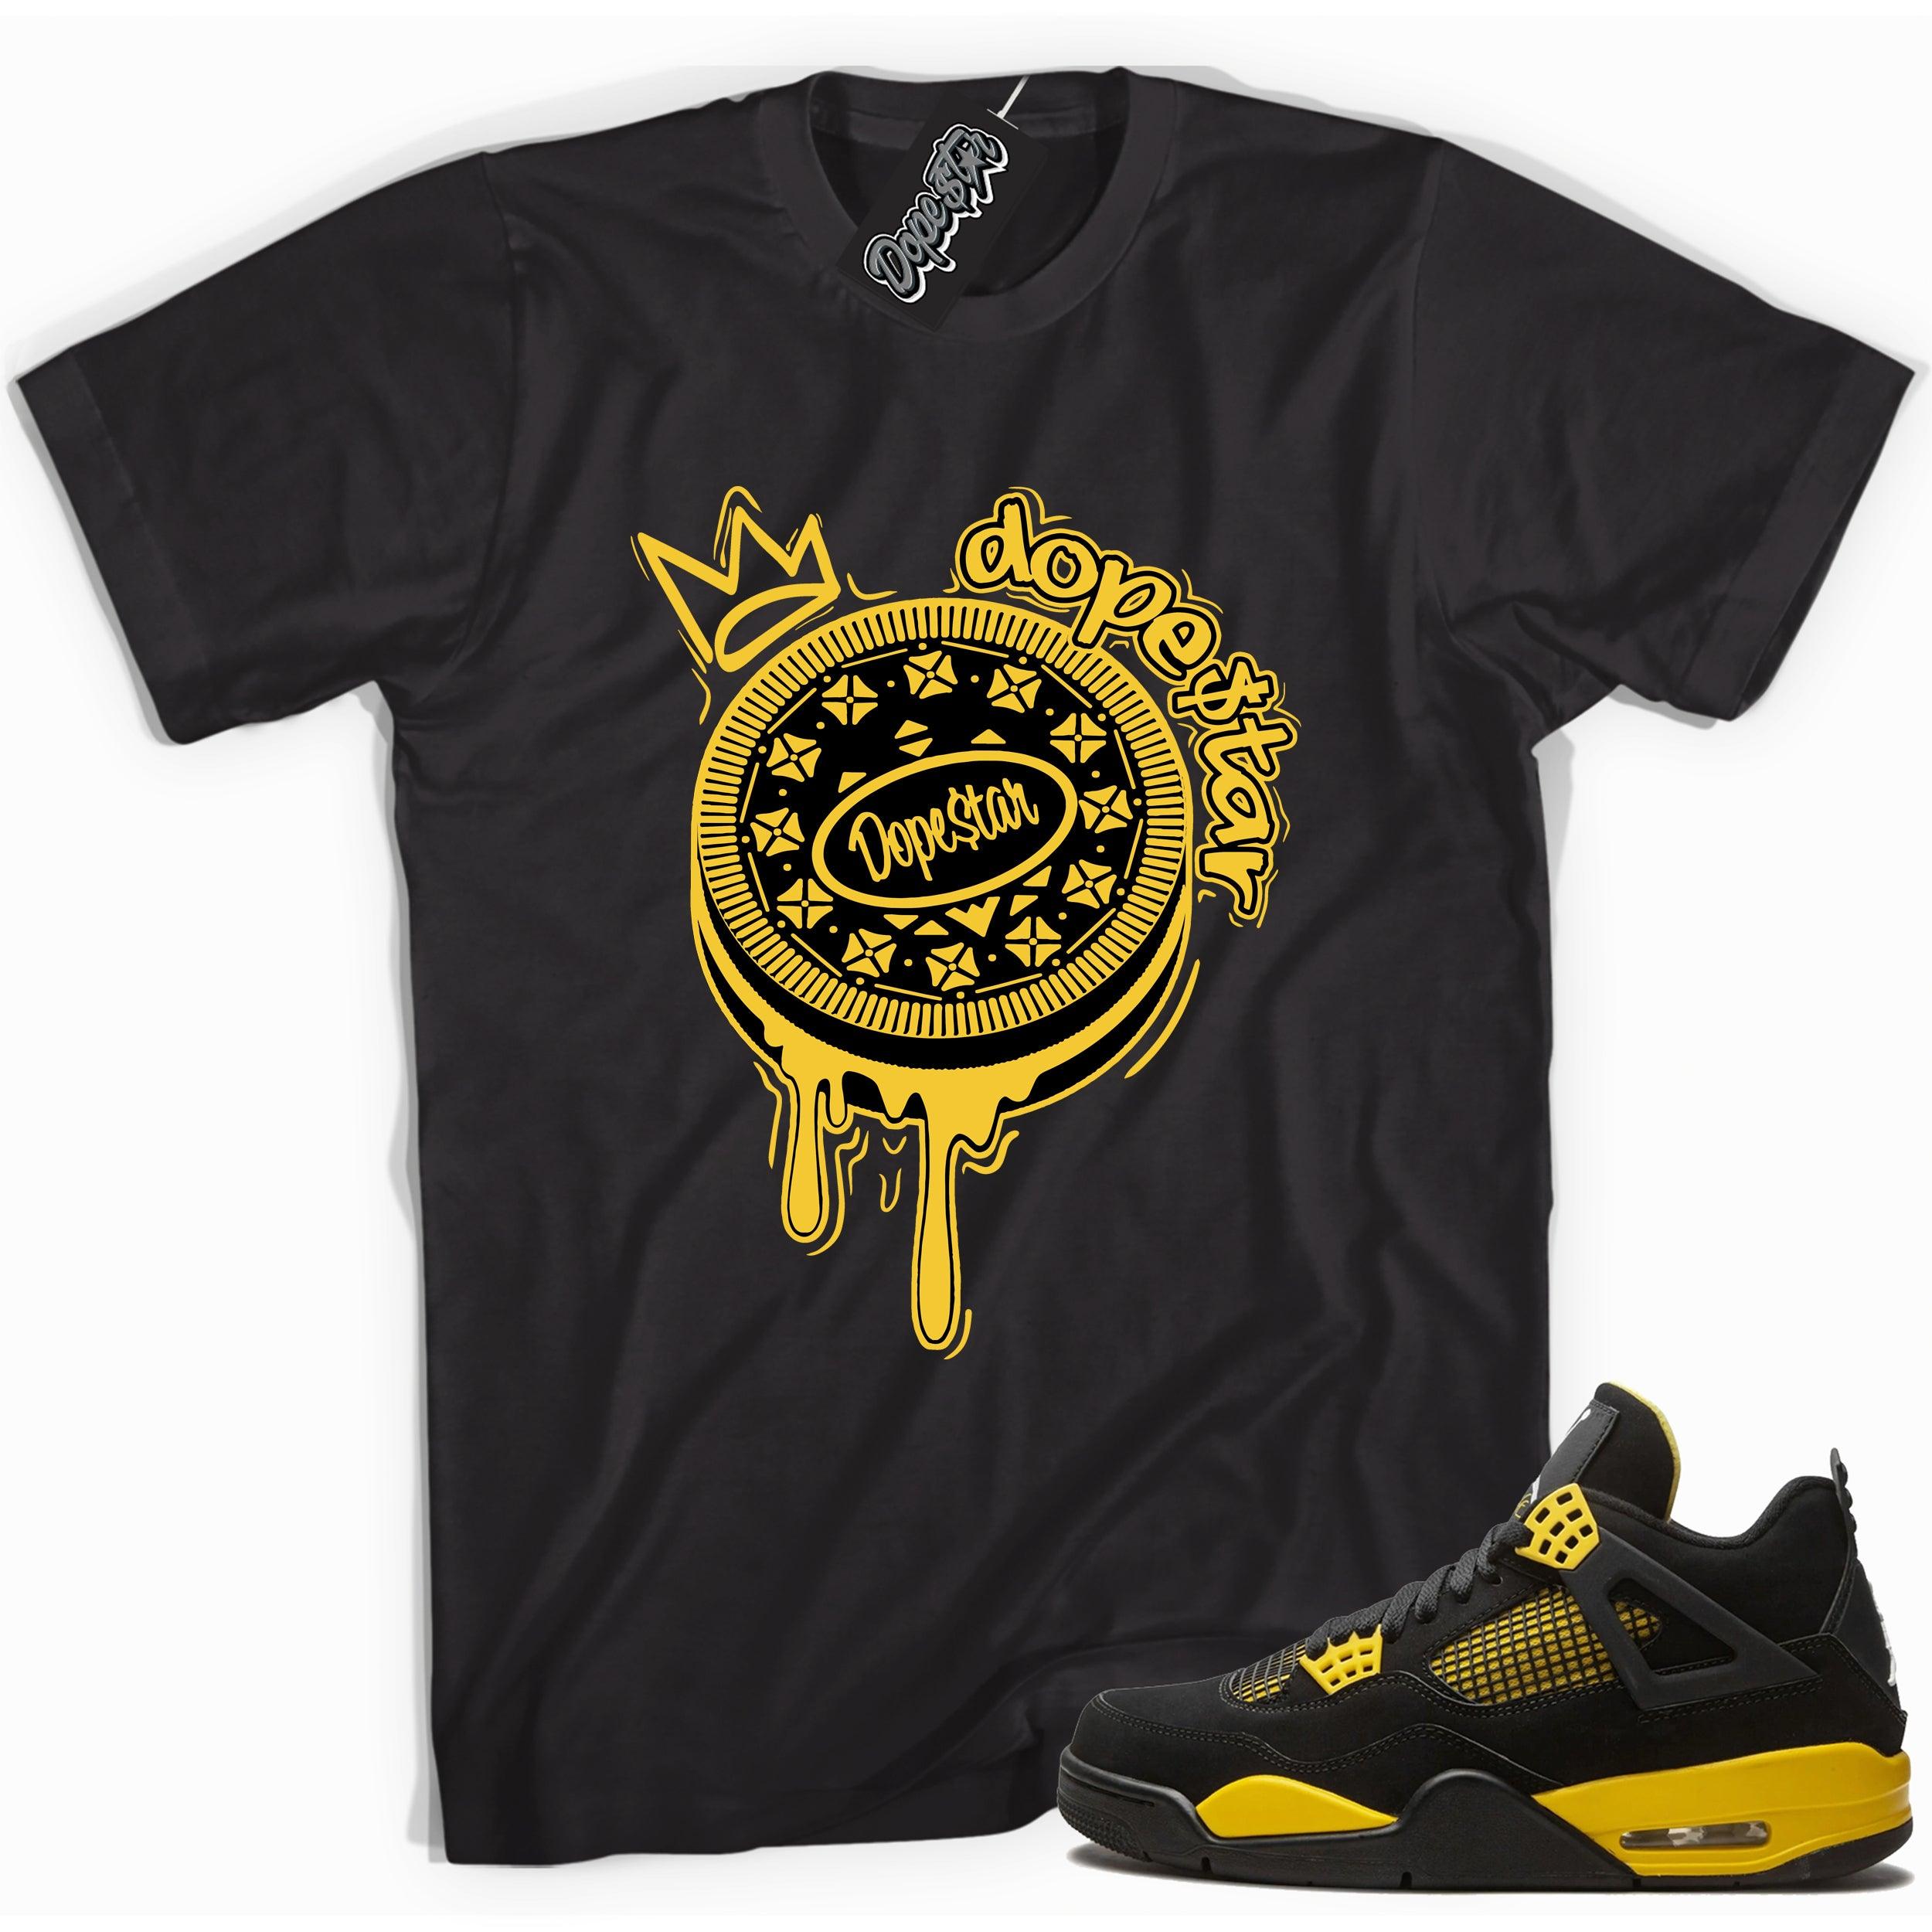 Cool black graphic tee with 'dopestar oreo' print, that perfectly matches  Air Jordan 4 Thunder sneakers